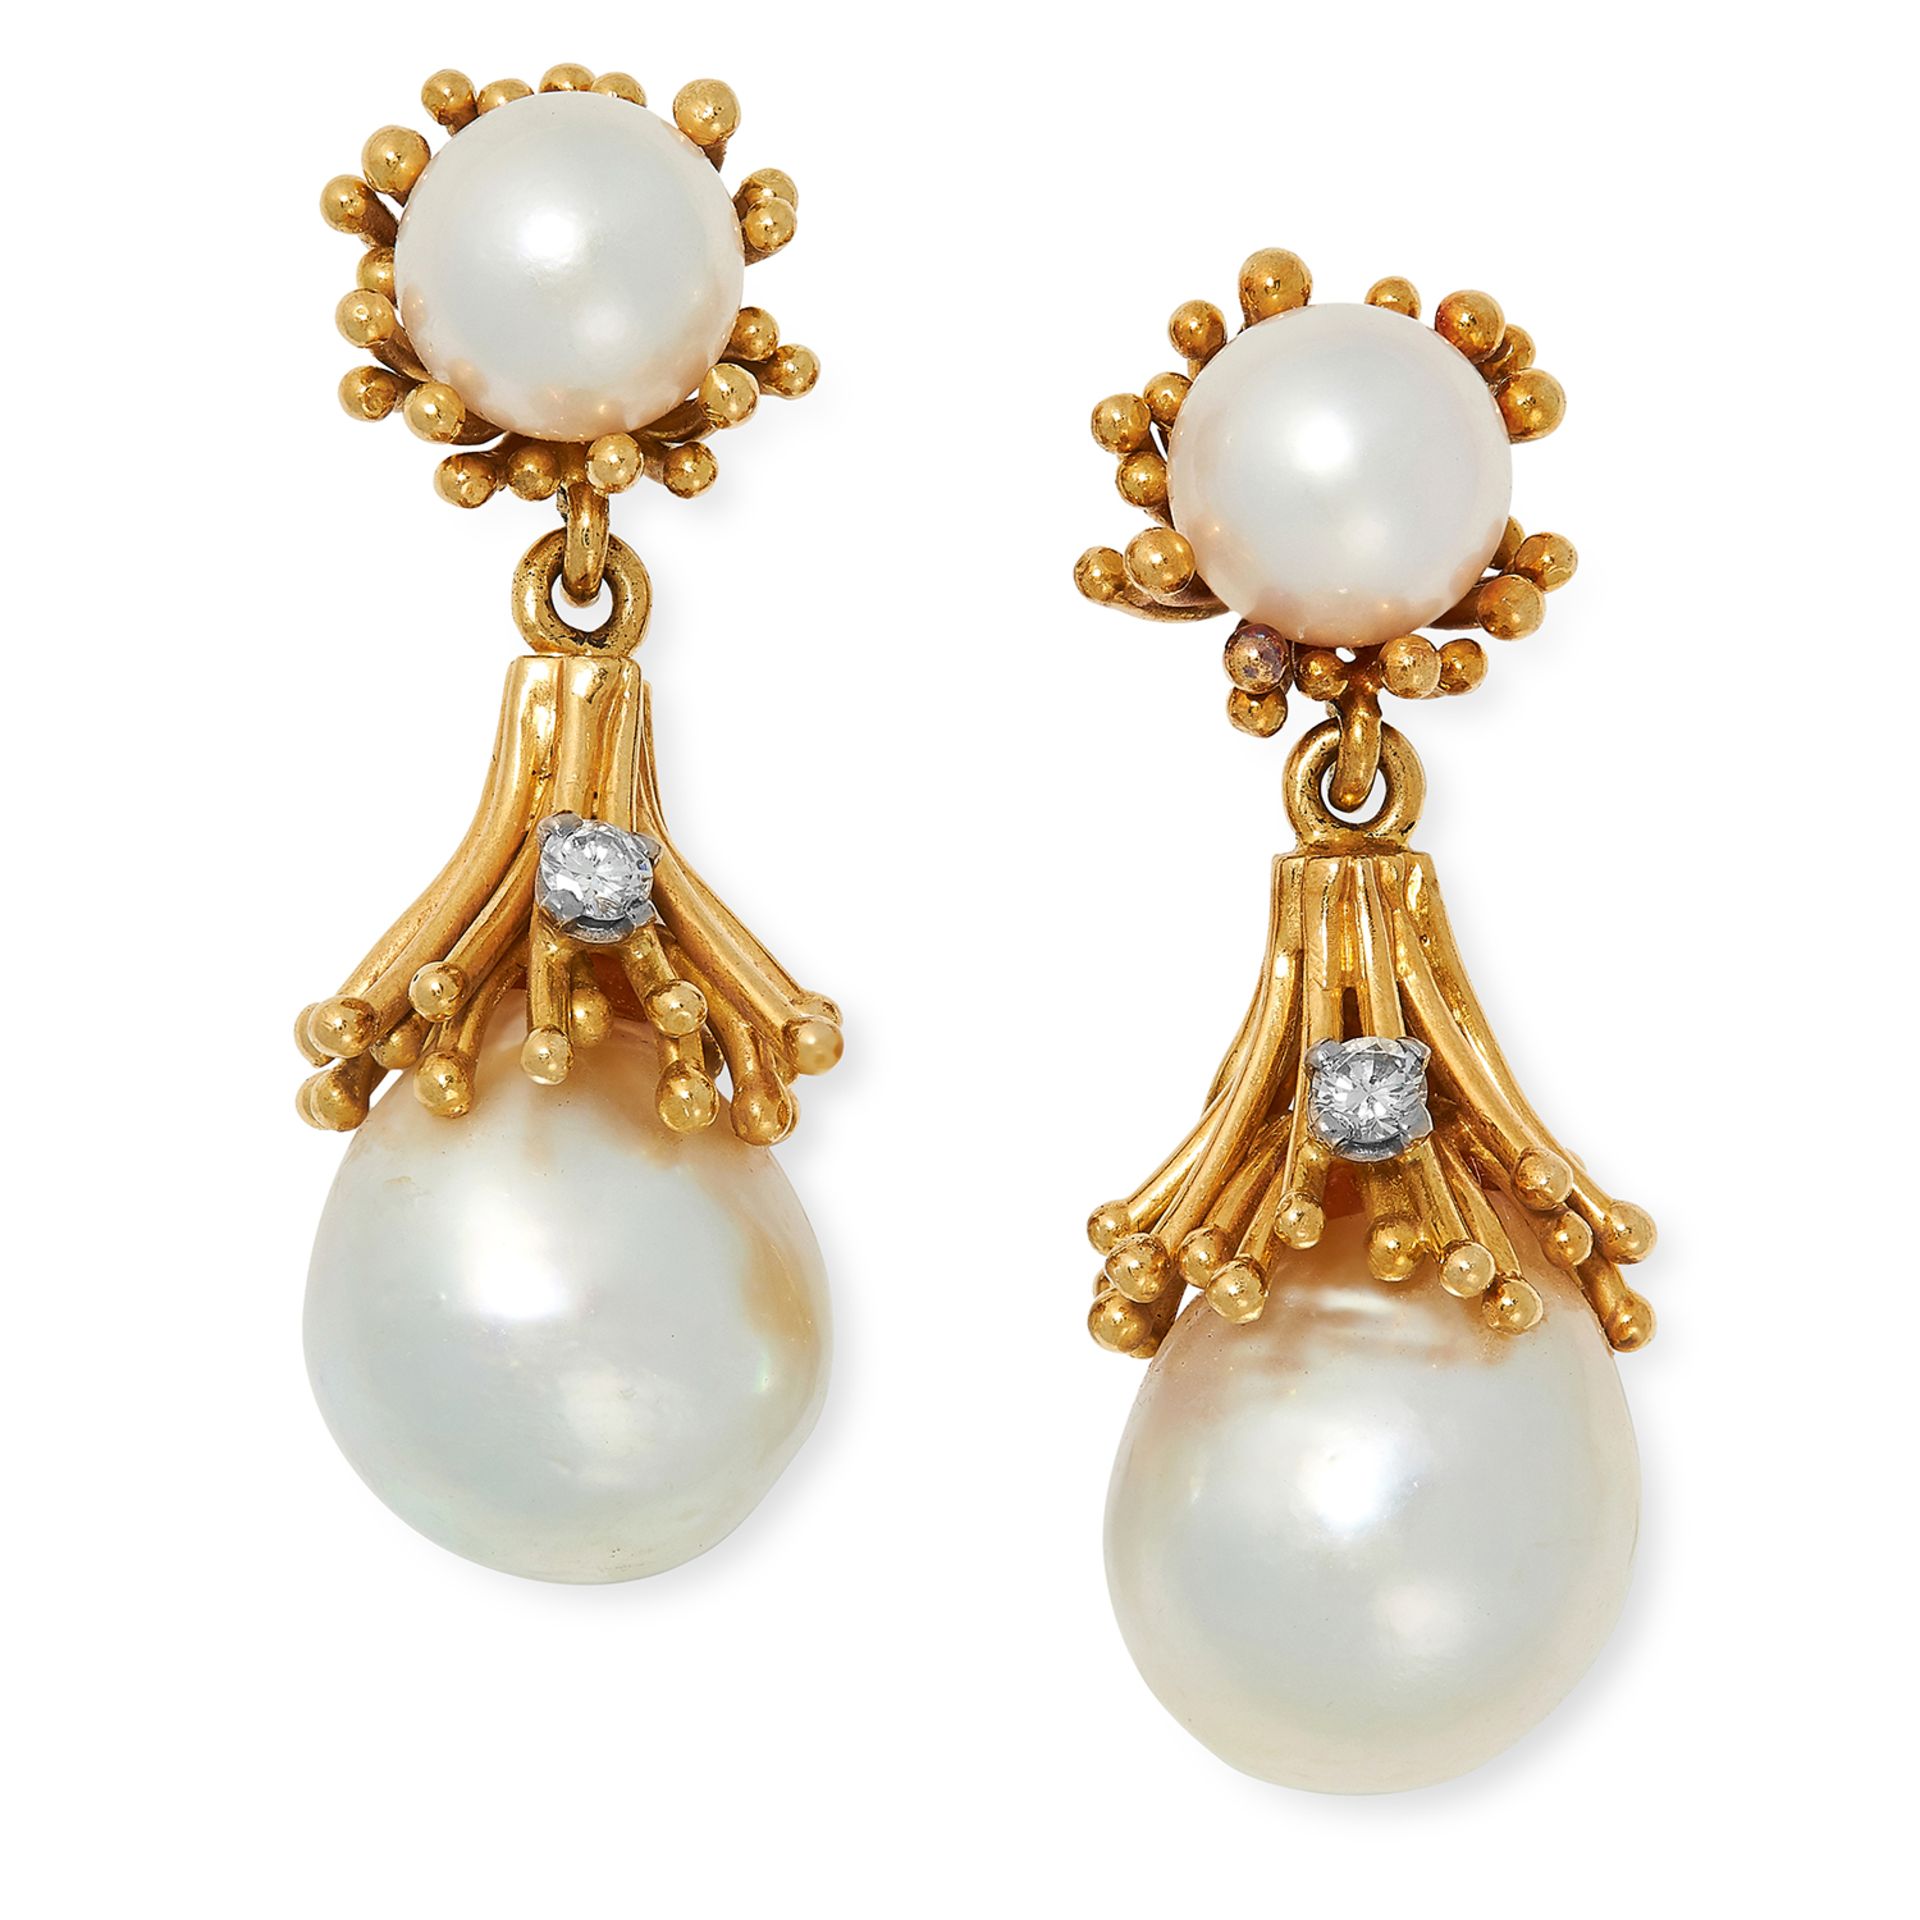 VINTAGE PEARL AND DIAMOND DROP EARRINGS, CIRCA 1970 each set with two pearls and a round cut